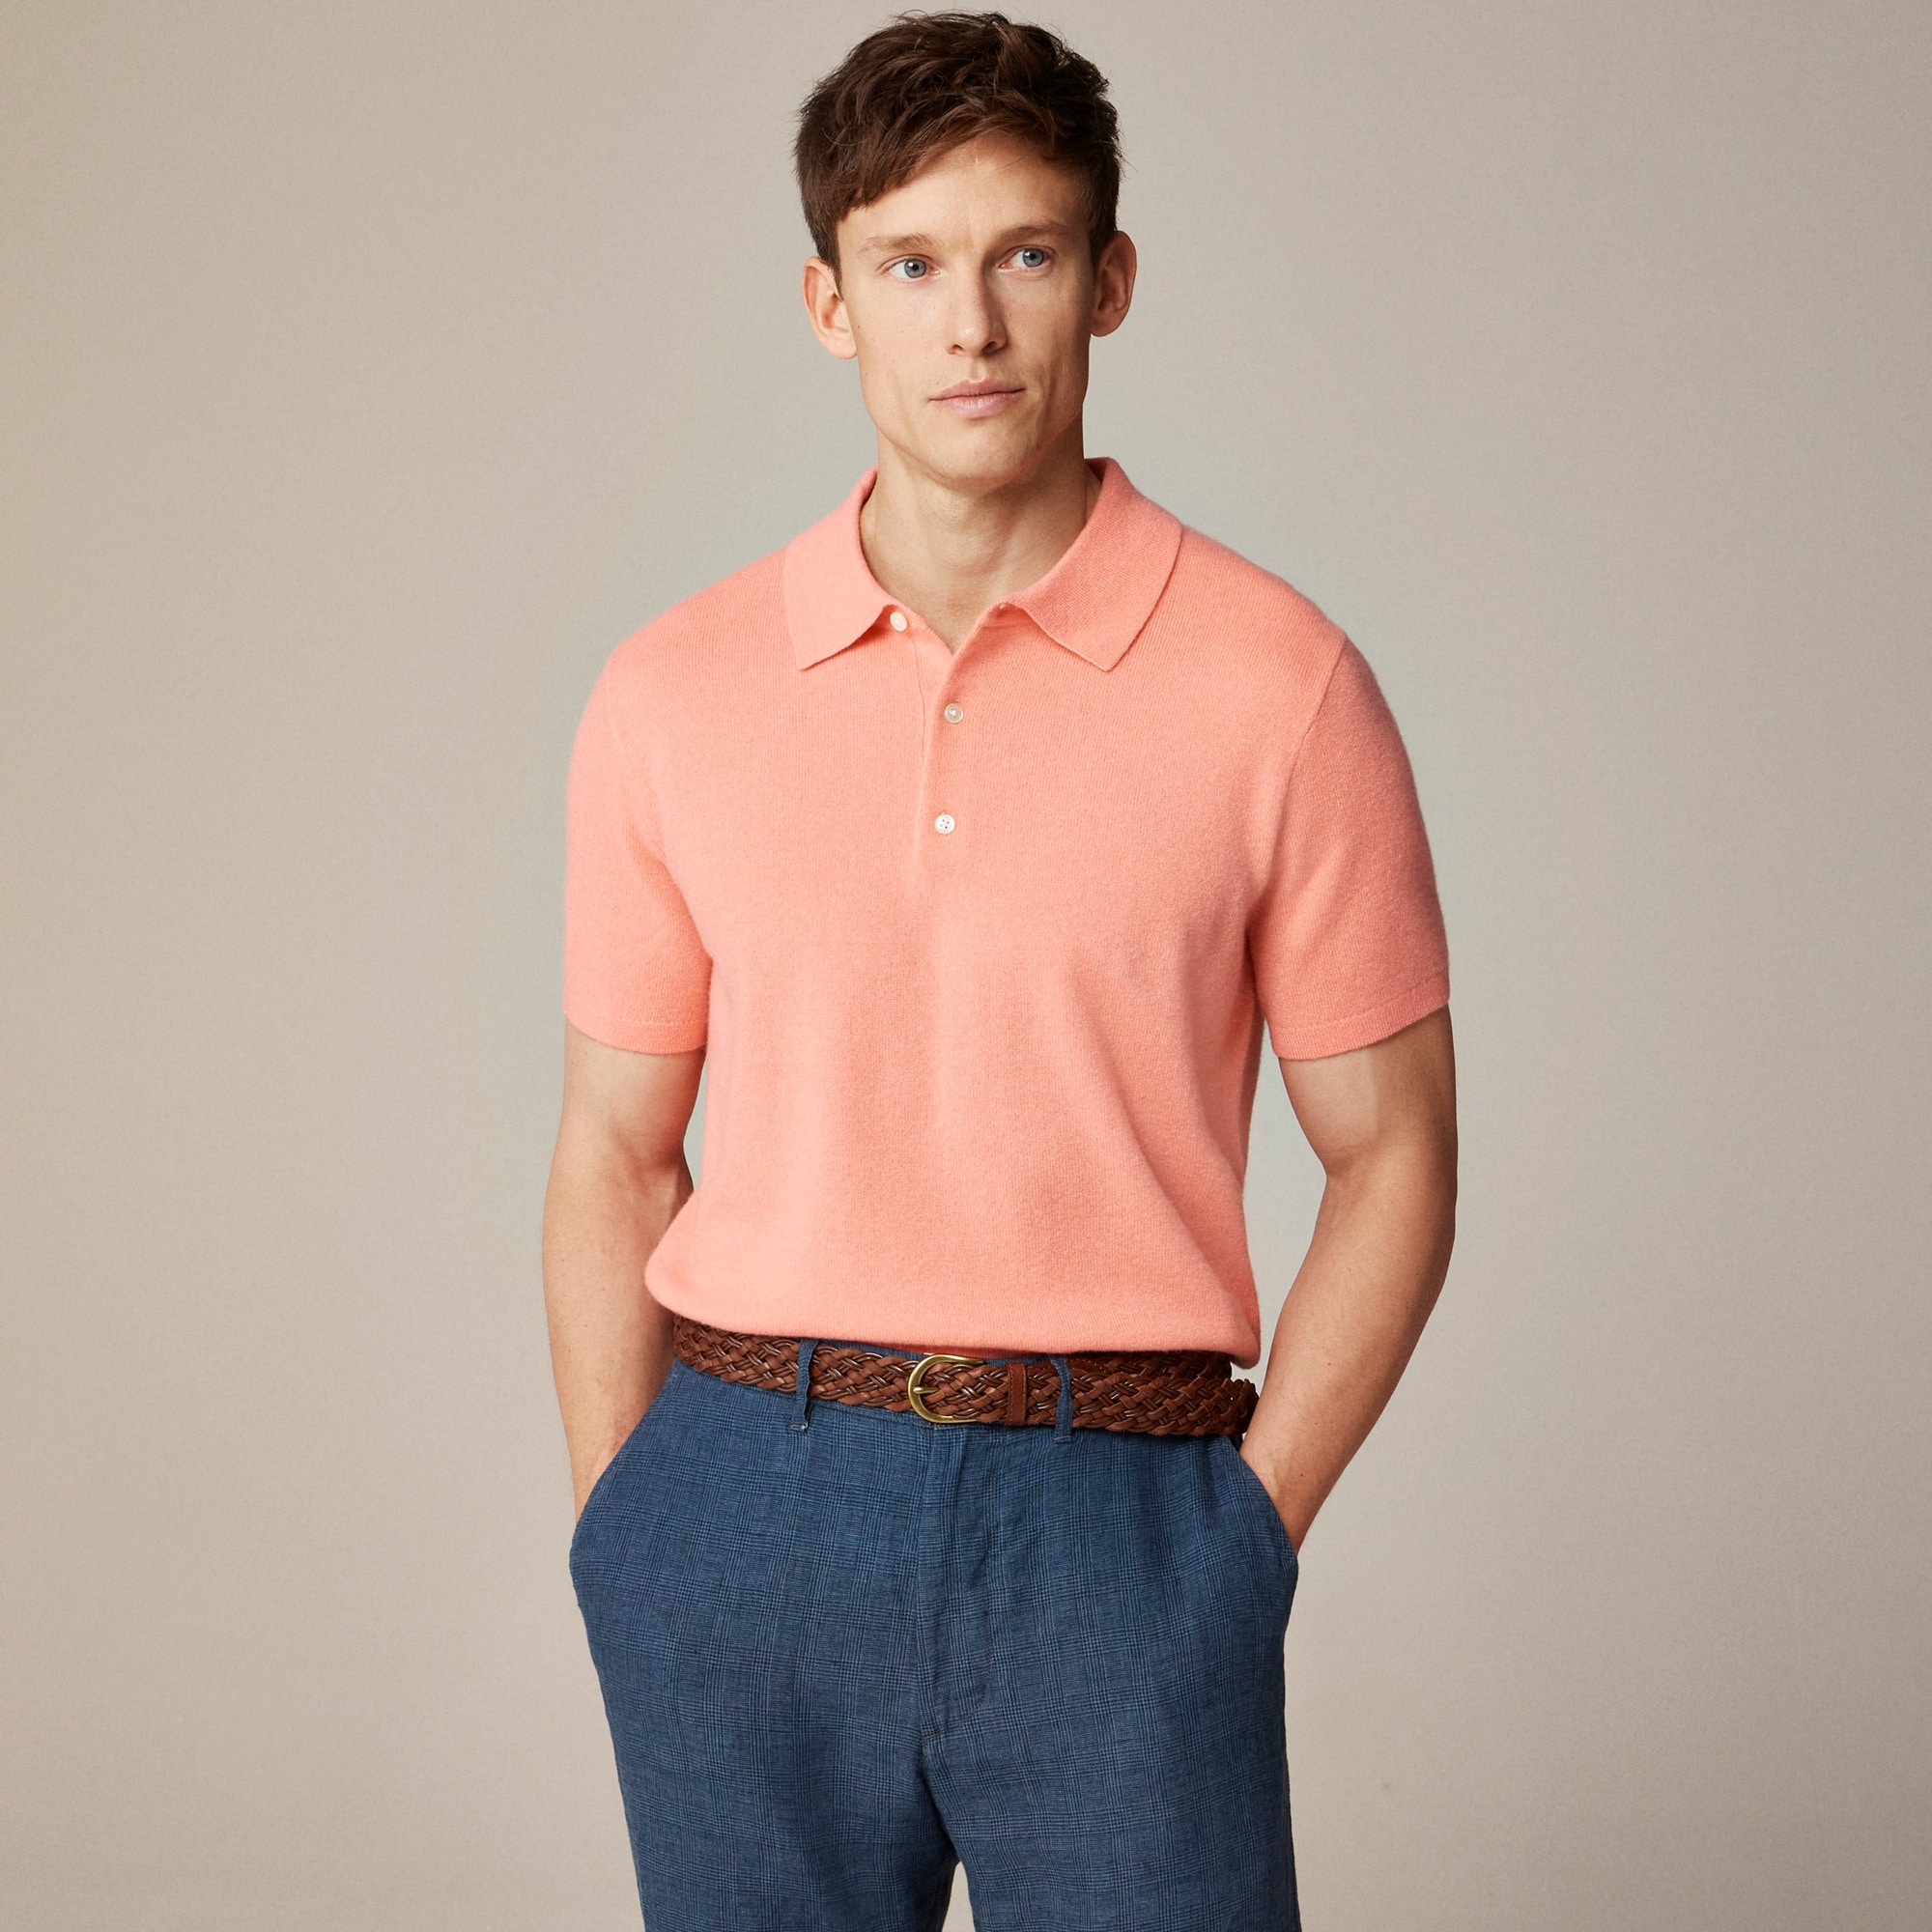  Cashmere short-sleeve sweater-polo